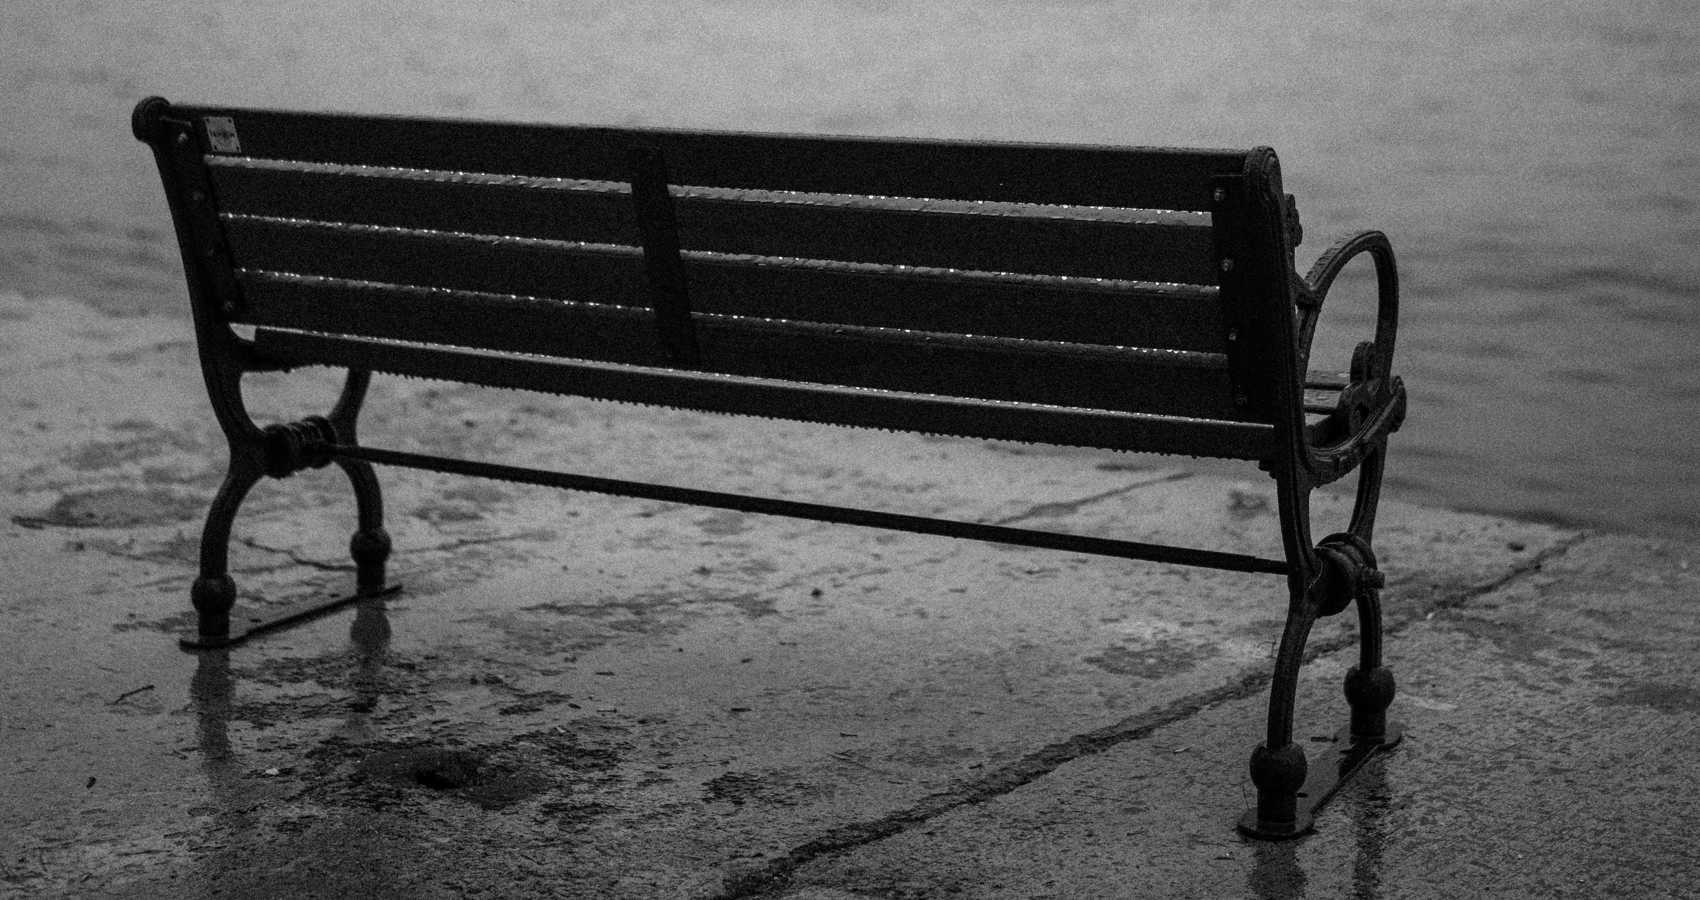 Trilogy On A Bench In The Rain, poetry by Tessa Weitemeier at Spillwords.com